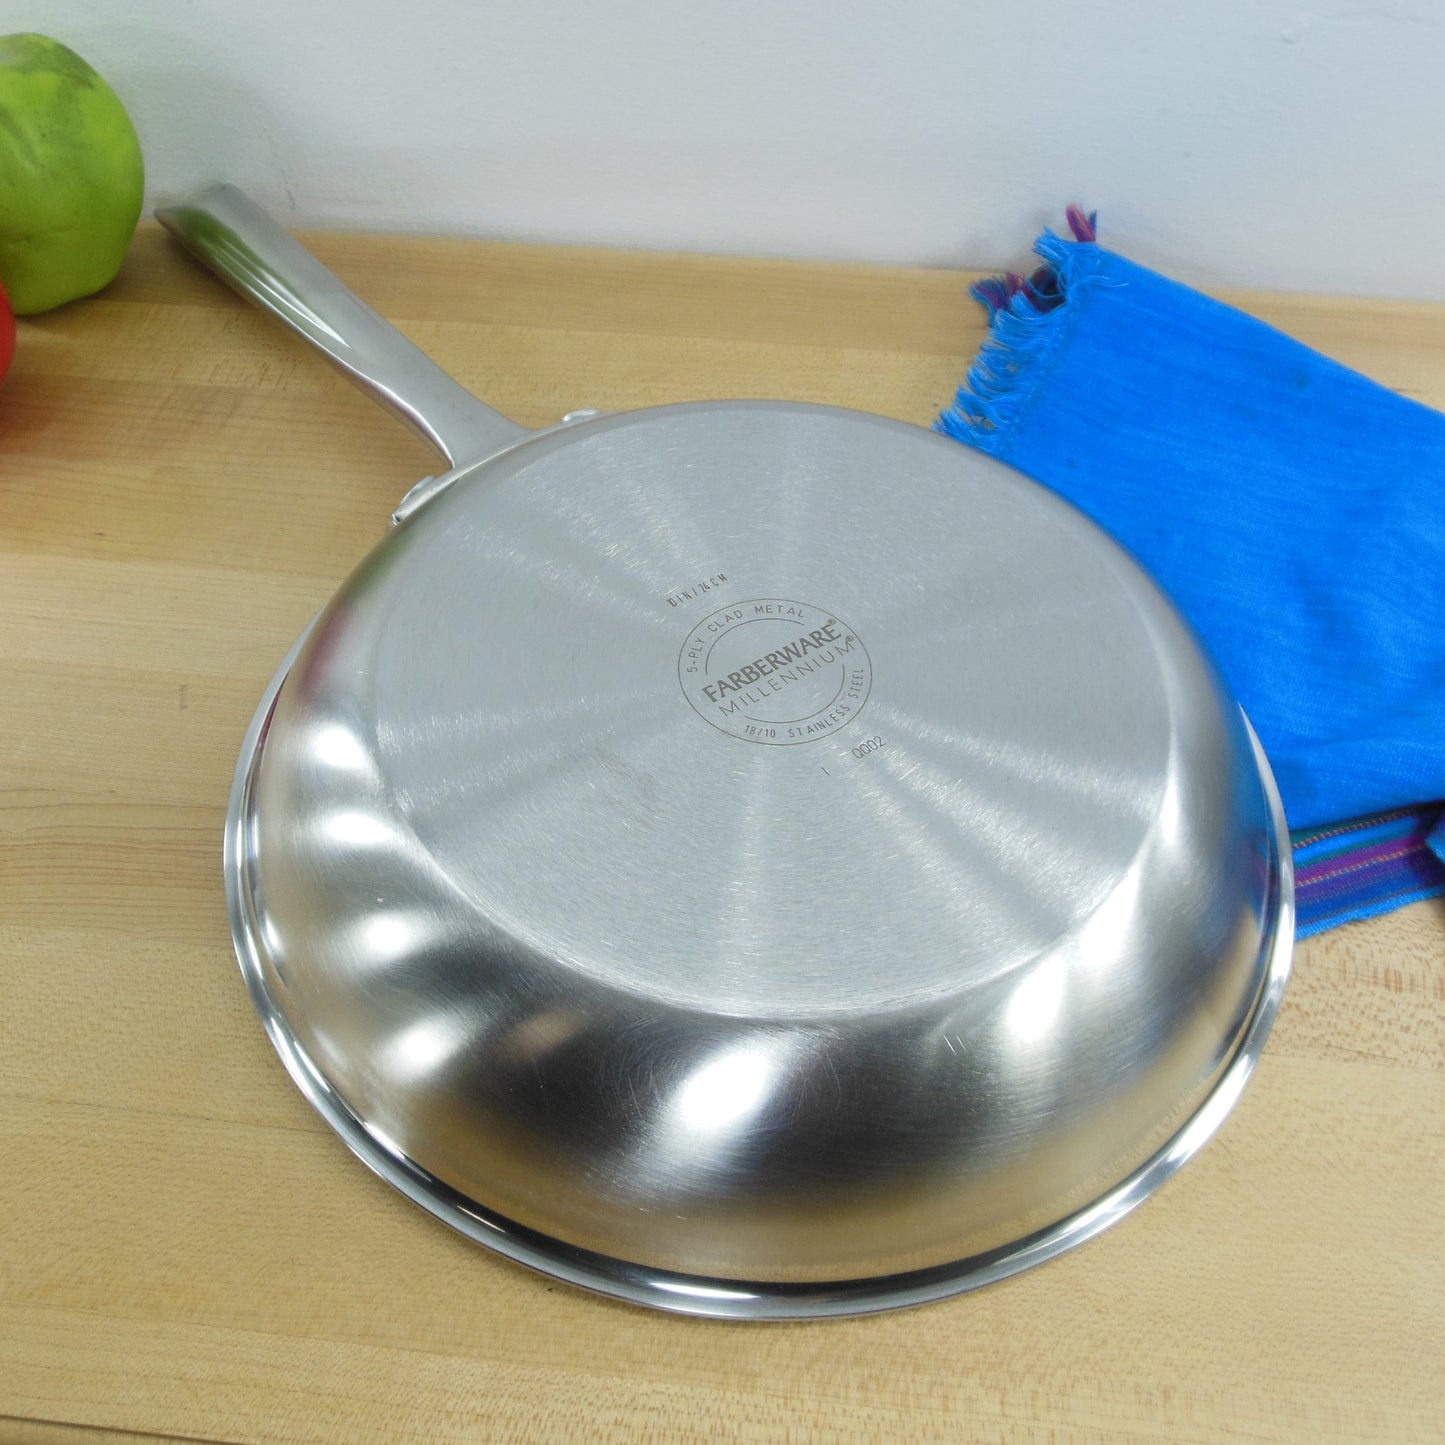 Farberware Millennium 18/10 Stainless 5 Ply Clad 10" Fry Pan Skillet used